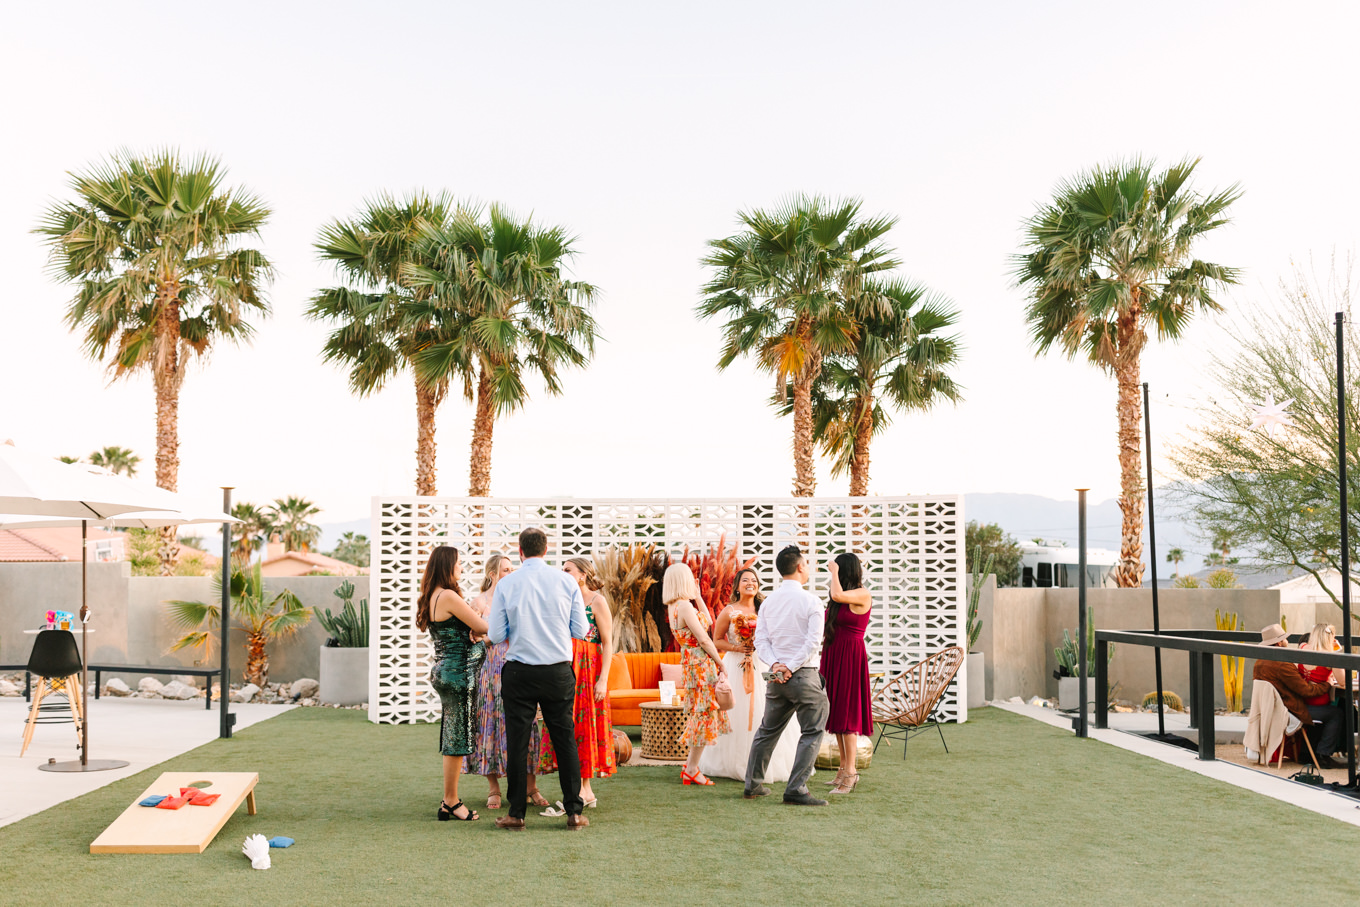 Cocktail hour games | Pink and orange Lautner Compound wedding | Colorful Palm Springs wedding photography | #palmspringsphotographer #palmspringswedding #lautnercompound #southerncaliforniawedding  Source: Mary Costa Photography | Los Angeles